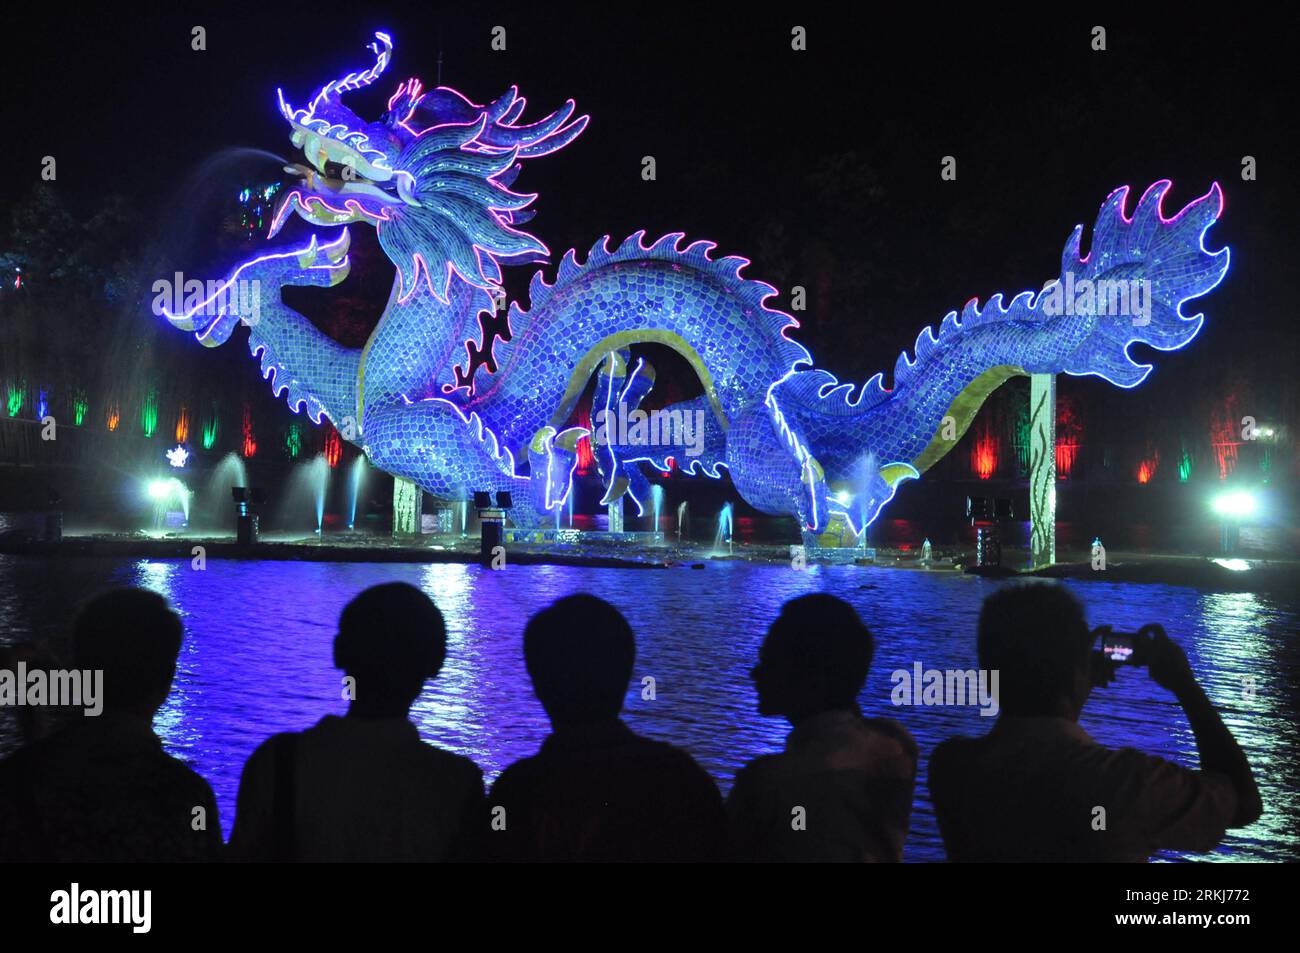 Bildnummer: 56027410  Datum: 18.09.2011  Copyright: imago/Xinhua (110919) -- JINGDEZHEN , Sep. 19, 2011 (Xinhua) -- view the procelain dragon in Jingdezhen, east China s Jiangxi Province, Sept. 18, 2011. This blue-and-white porcelain dragon composing of 260,000 pieces measures 56 meters long and 13.8 meters tall, which stands for 56 nations and 1.3 billion people. (Xinhua/Hong Jingjing) (zmj) CHINA-JINGDEZHEN-PORCELAIN (CN) PUBLICATIONxNOTxINxCHN Gesellschaft Drache Porzellan Porzellandrache Objekte Statue Drachenstatue xns x0x 2011 quer      56027410 Date 18 09 2011 Copyright Imago XINHUA  Ji Stock Photo